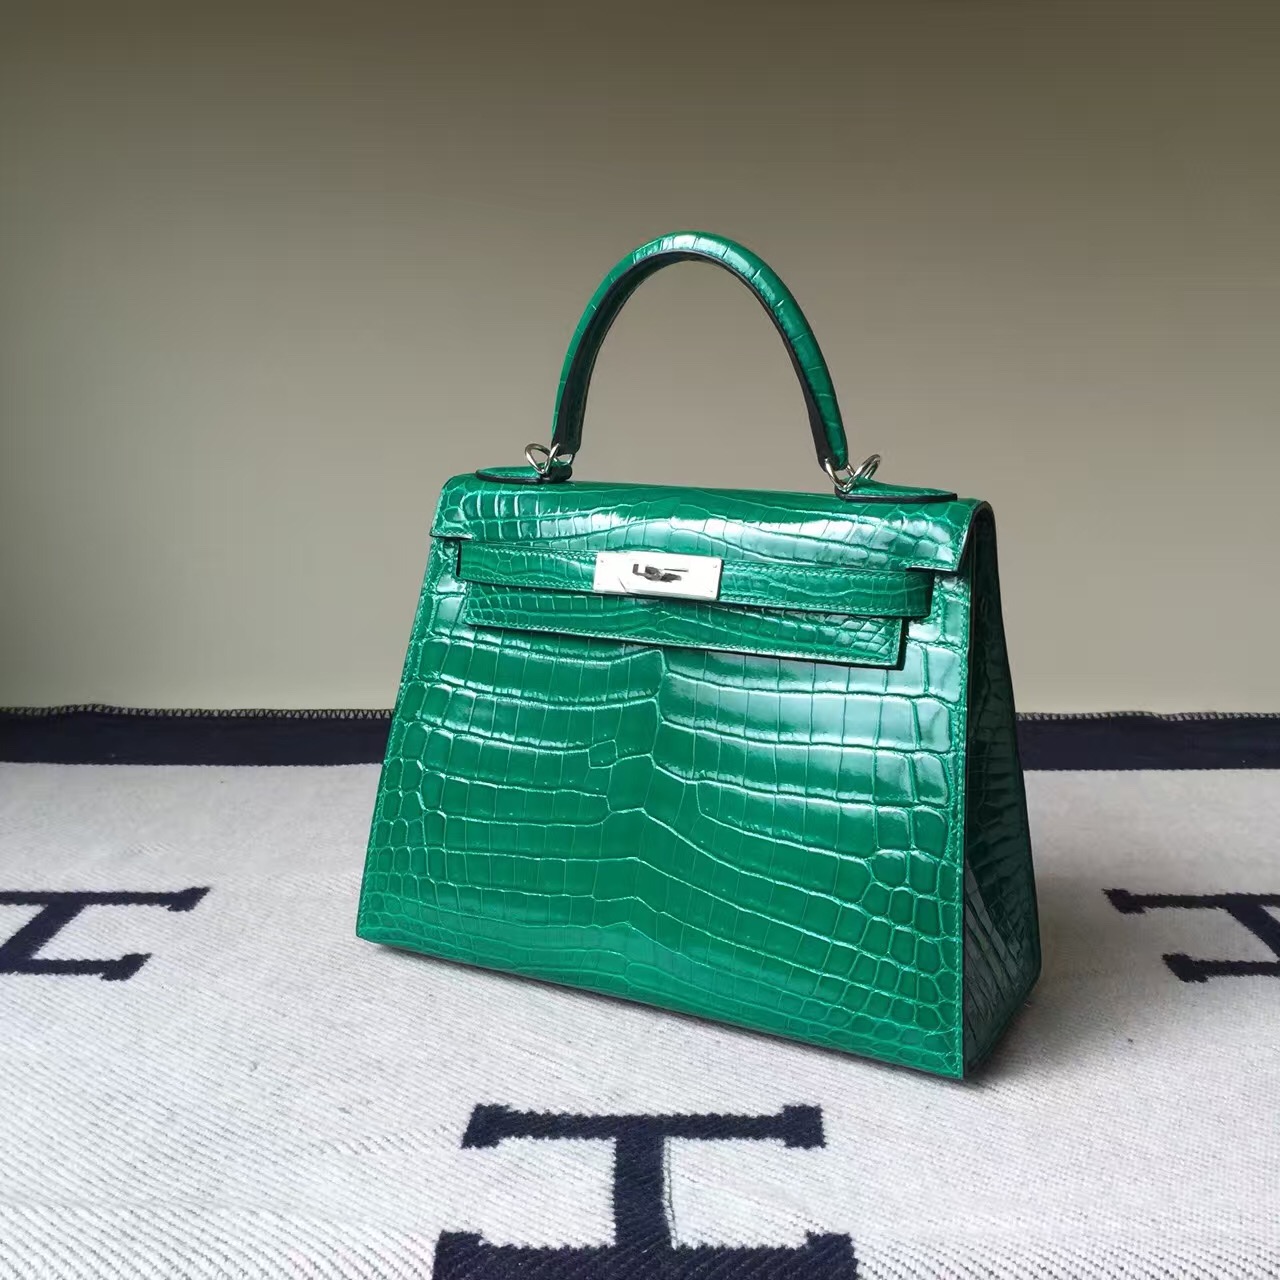 Sale Hermes Crocodile Shiny Leather Sellier Kelly Bag28CM in 6Q Emerald Green